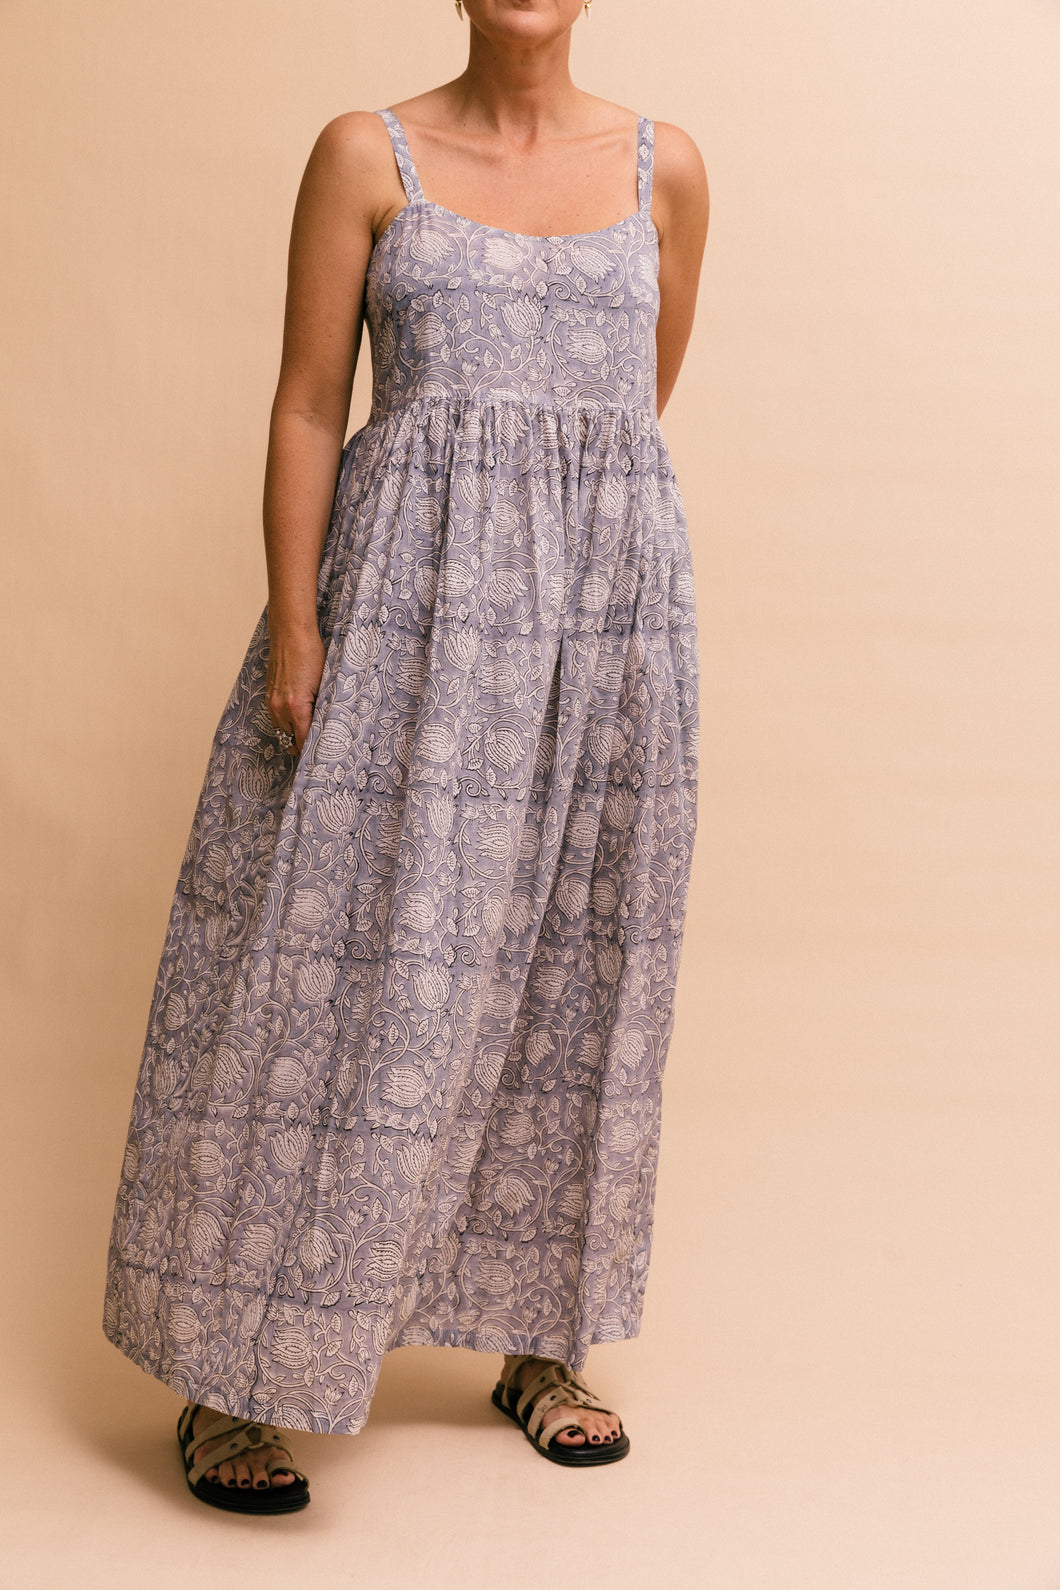 The empire style bodice has been created to flatter a small bust or large. In a blue block print, Francesca is an easy going, throw on and go frock to flatter all body shapes. 